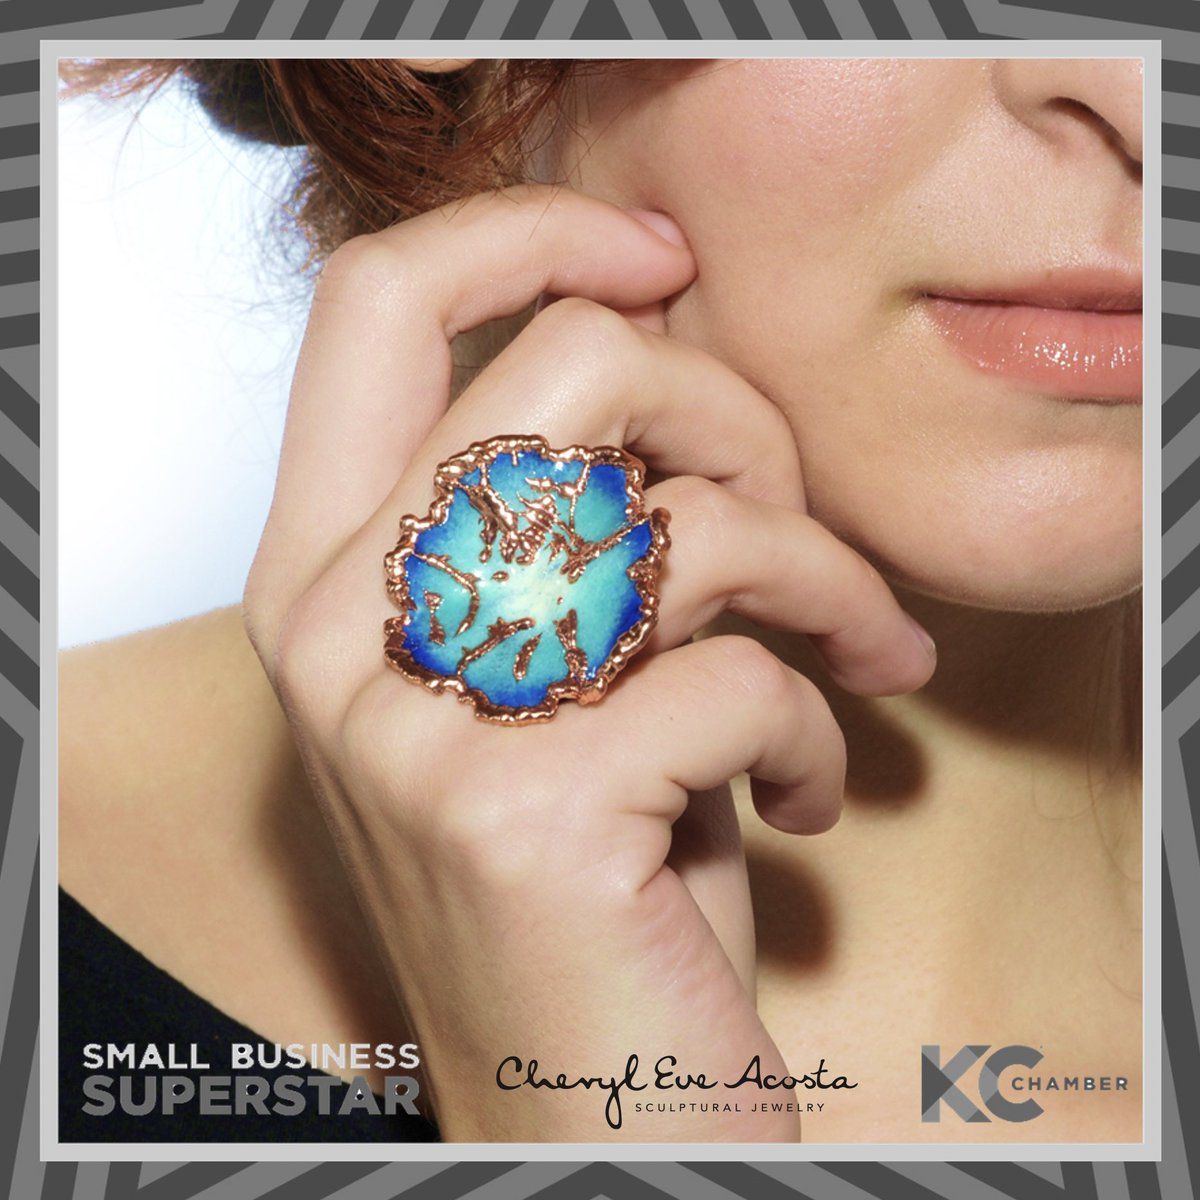 Thanks collectors and supporters, for nominating my jewelry business- #CherylEveAcosta as a #SmallBizSuperstar with the @kcchamber ! I’m honored for the recognition!! 
#merdeverre #shoplocalkc #kansascity #kcchamber #kccrossroads #kcmo #SmallBusiness #jewelry